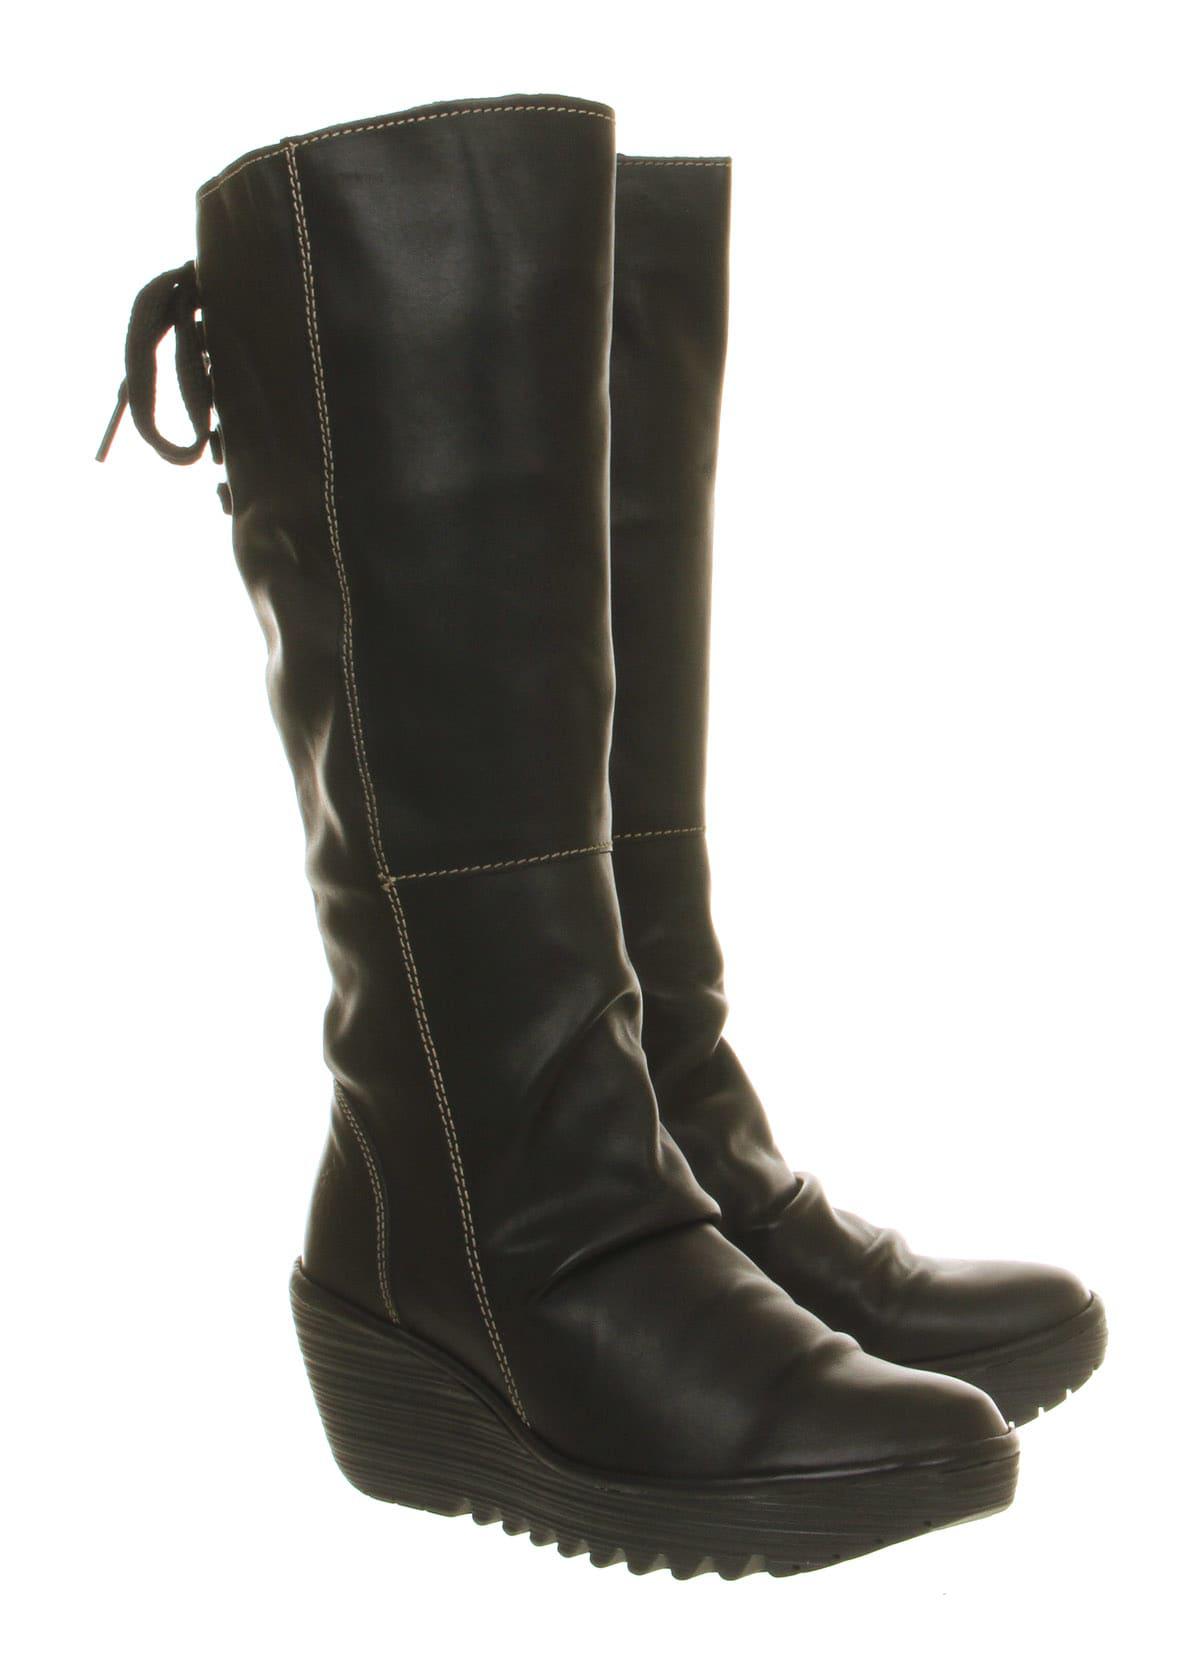 Fly London Yust Wedge Knee Boots in Black - Lyst